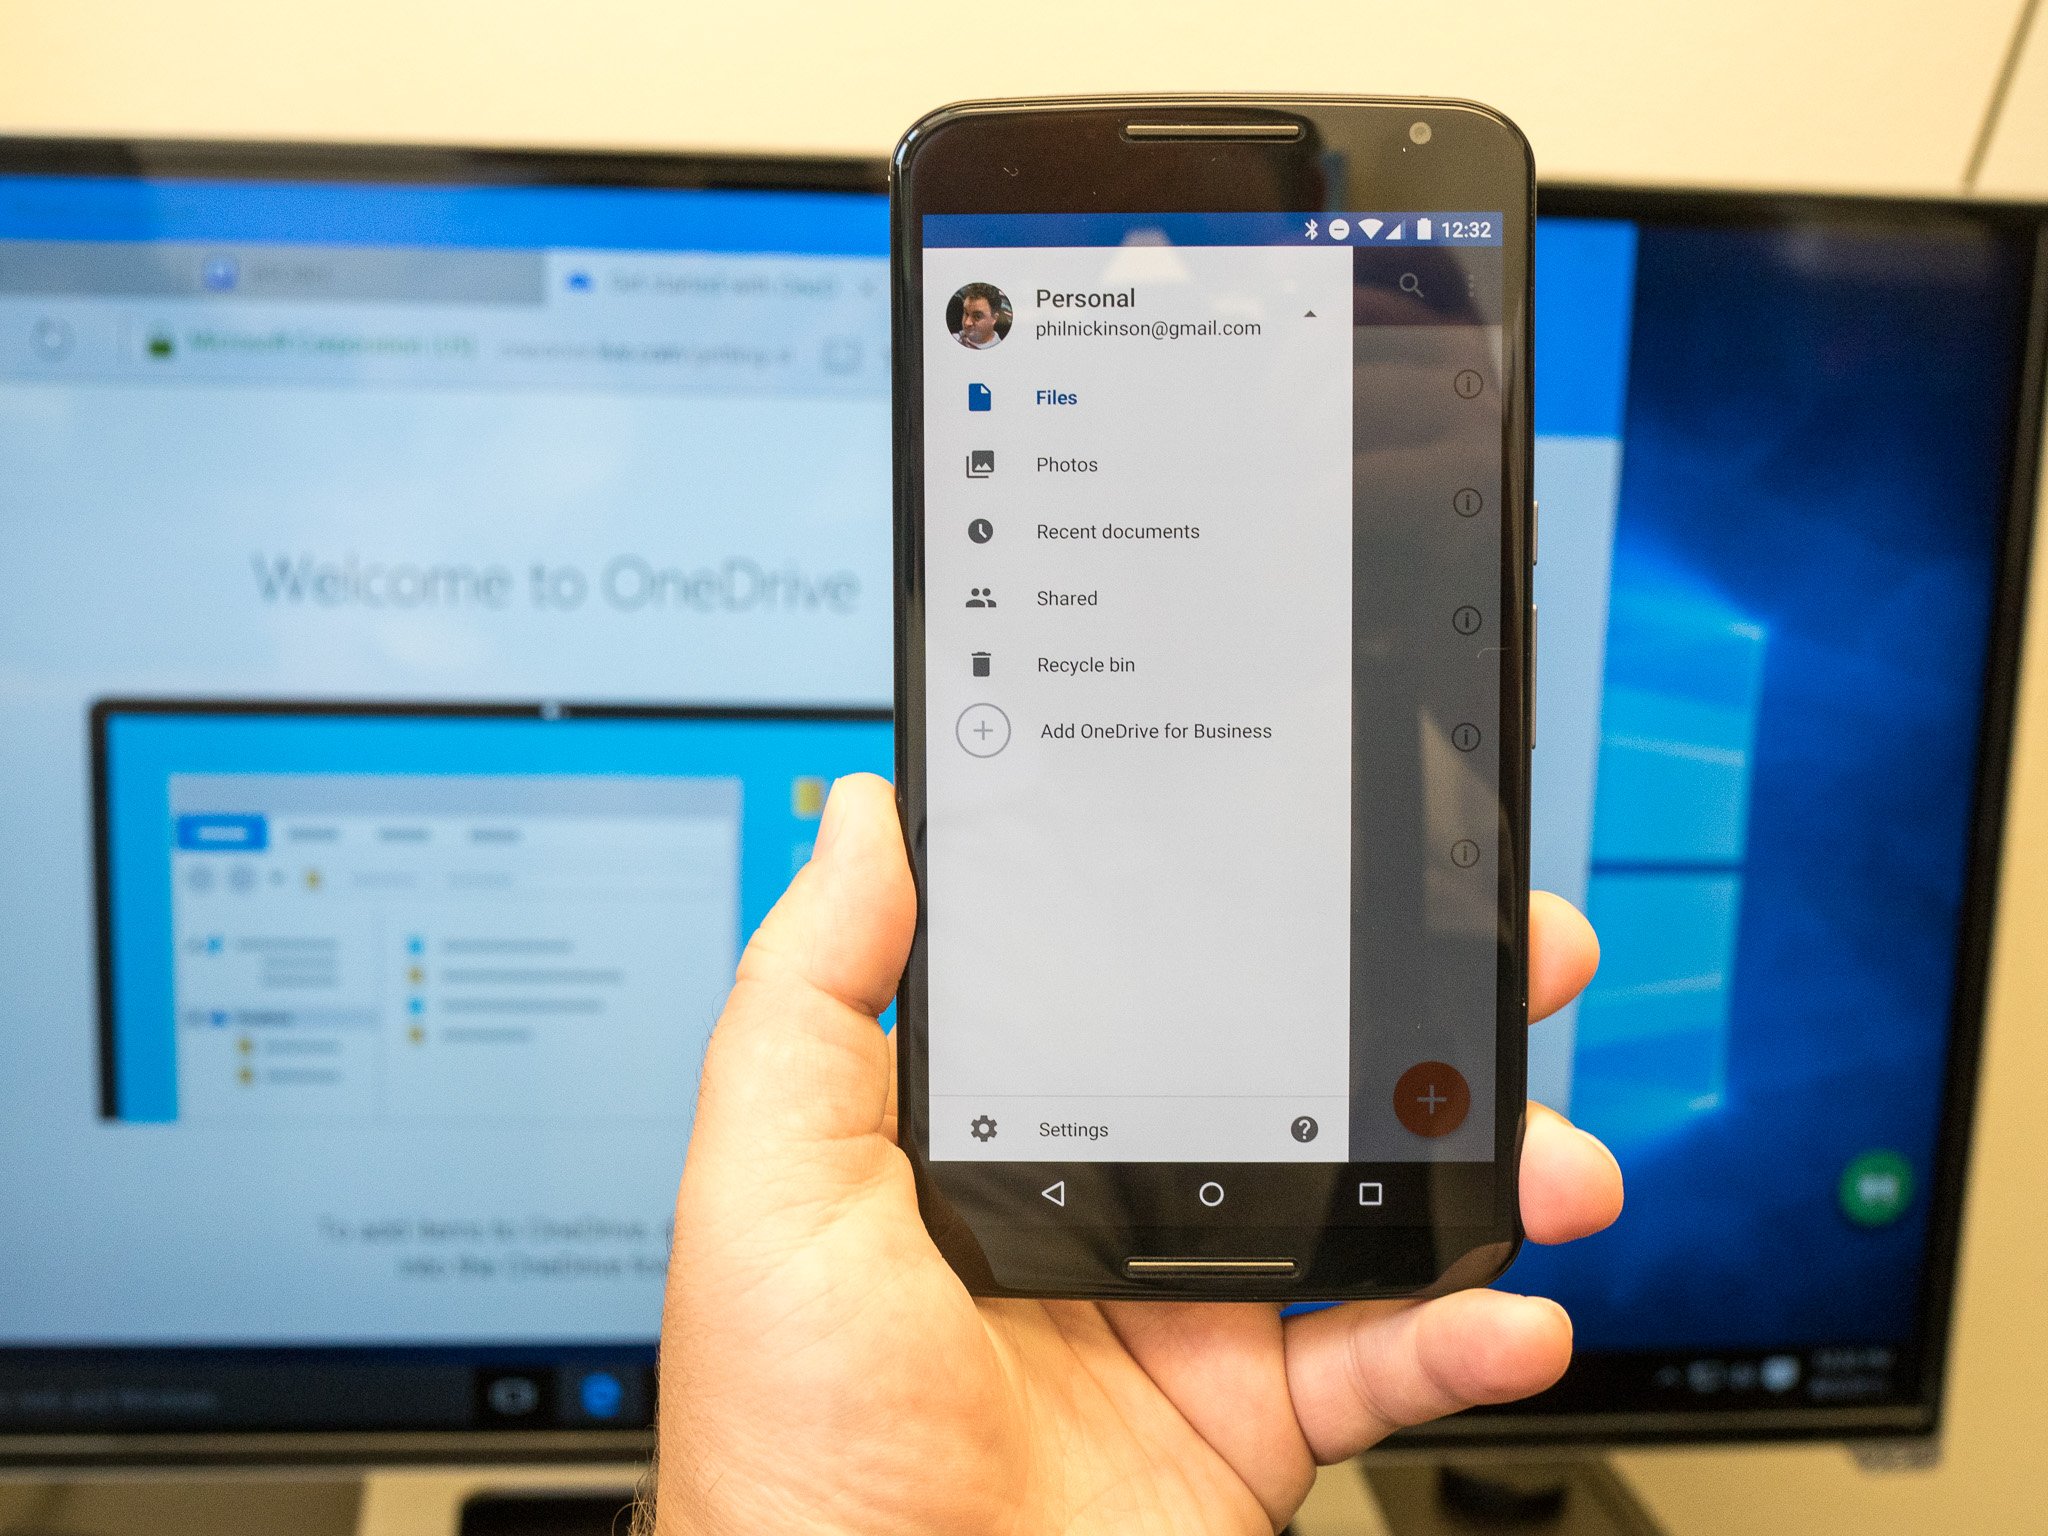 A phone held in front of a PC monitor, both showing the Microsoft OneDrive app